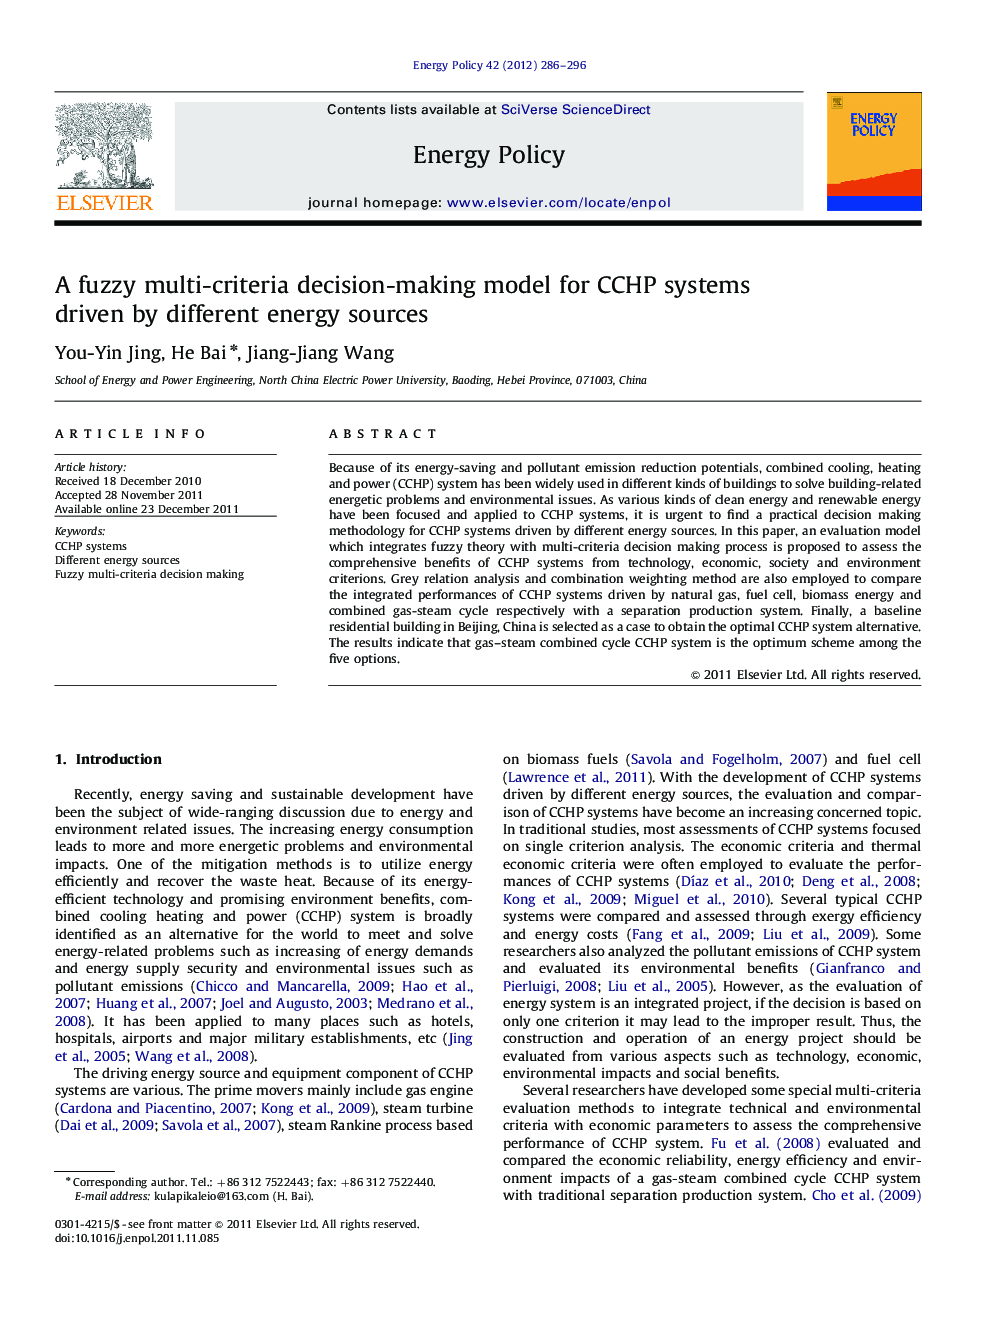 A fuzzy multi-criteria decision-making model for CCHP systems driven by different energy sources